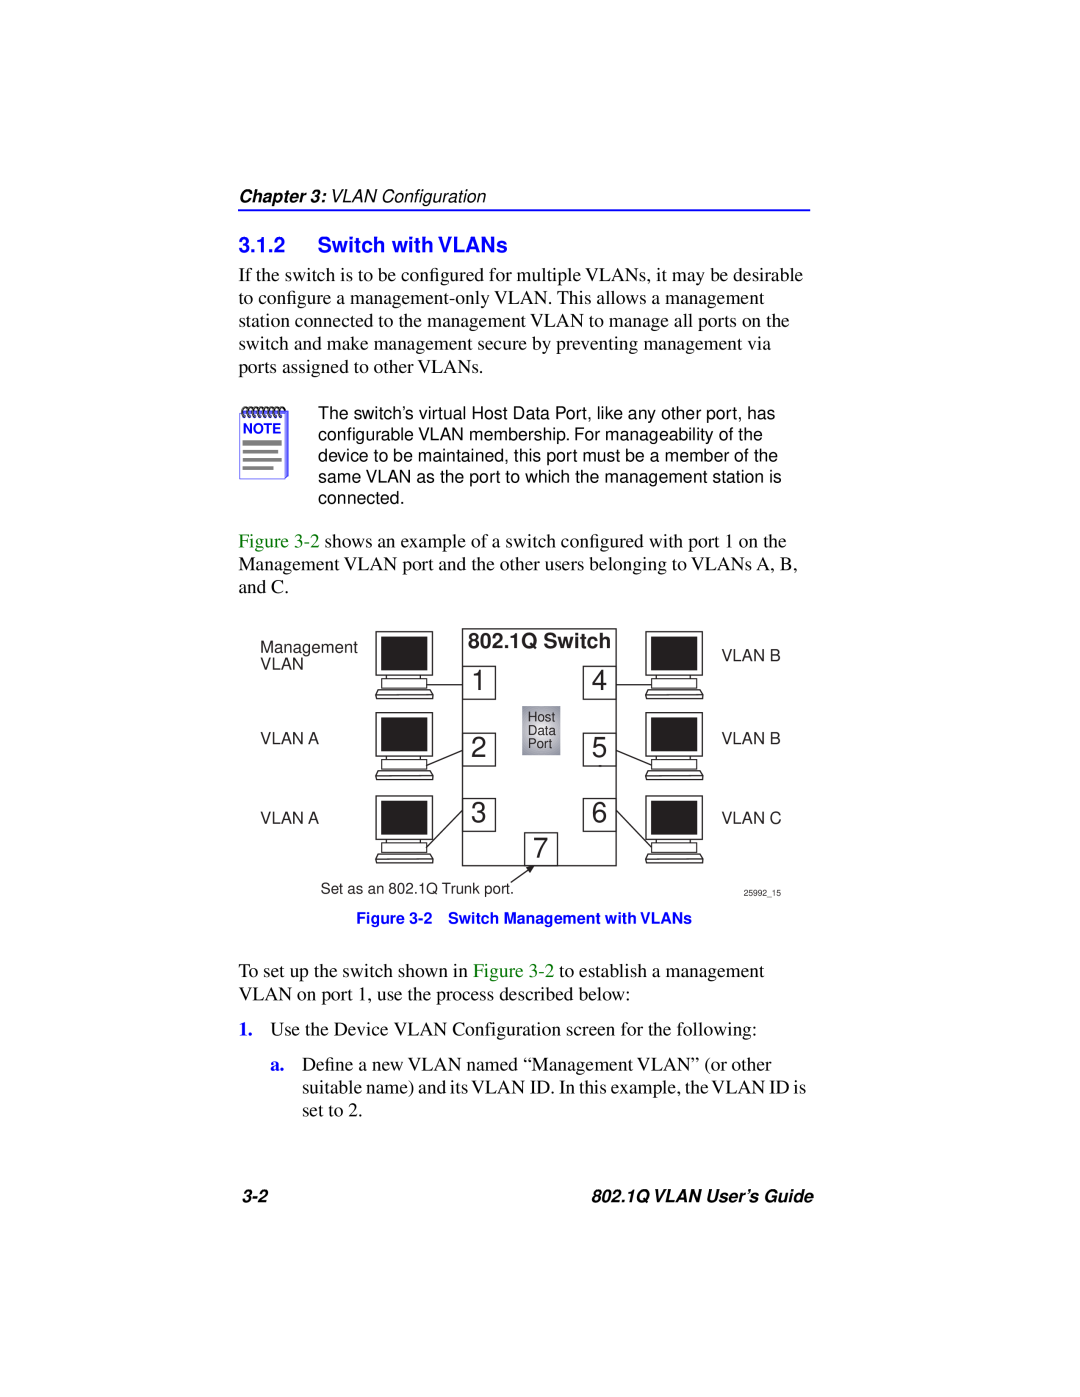 Cabletron Systems manual Switch with VLANs, 802.1Q Switch 